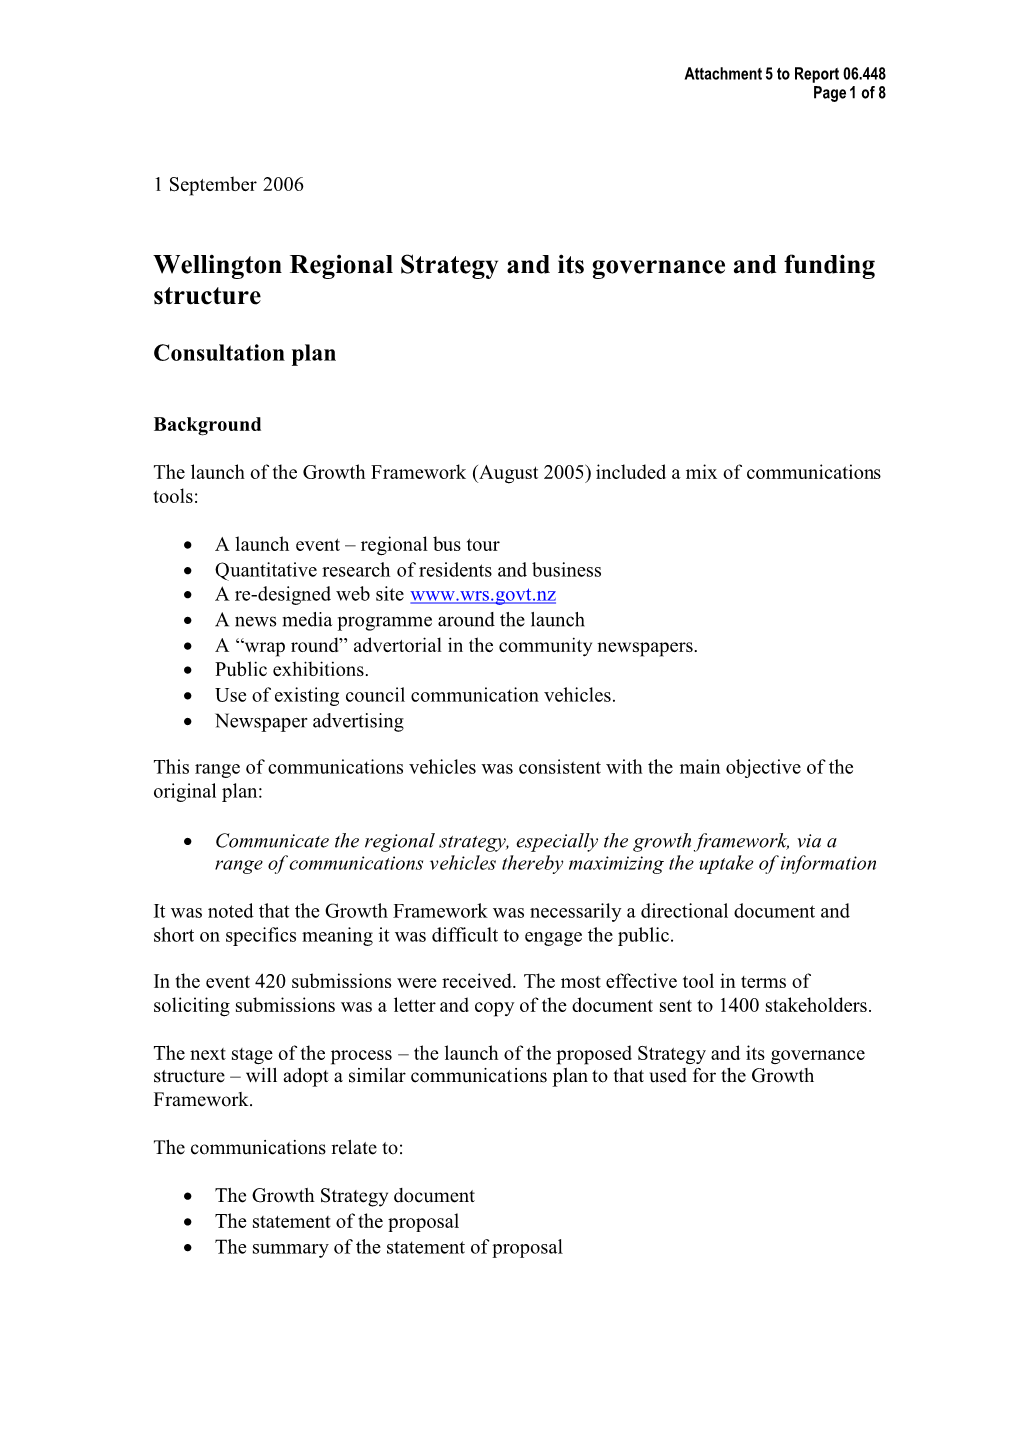 Wellington Regional Strategy and Its Governance and Funding Structure